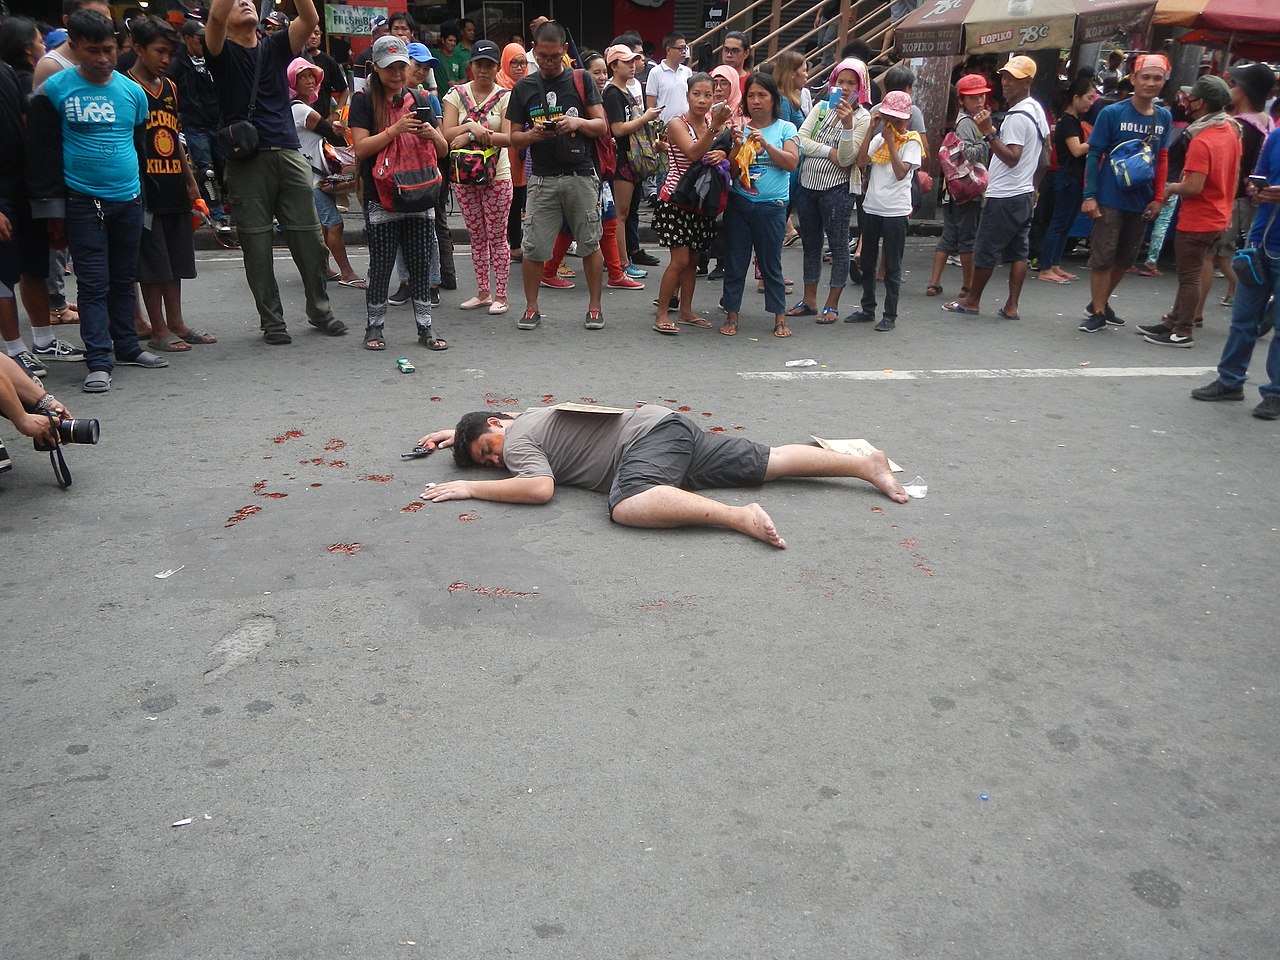 Demonstrator reenacts what the (alleged) extrajudicial killing looked like. Writing on the cardboard placed on the body was typically used in the crime allegedly related to drugs since Rodrigo Duterte was inaugurated as the president.